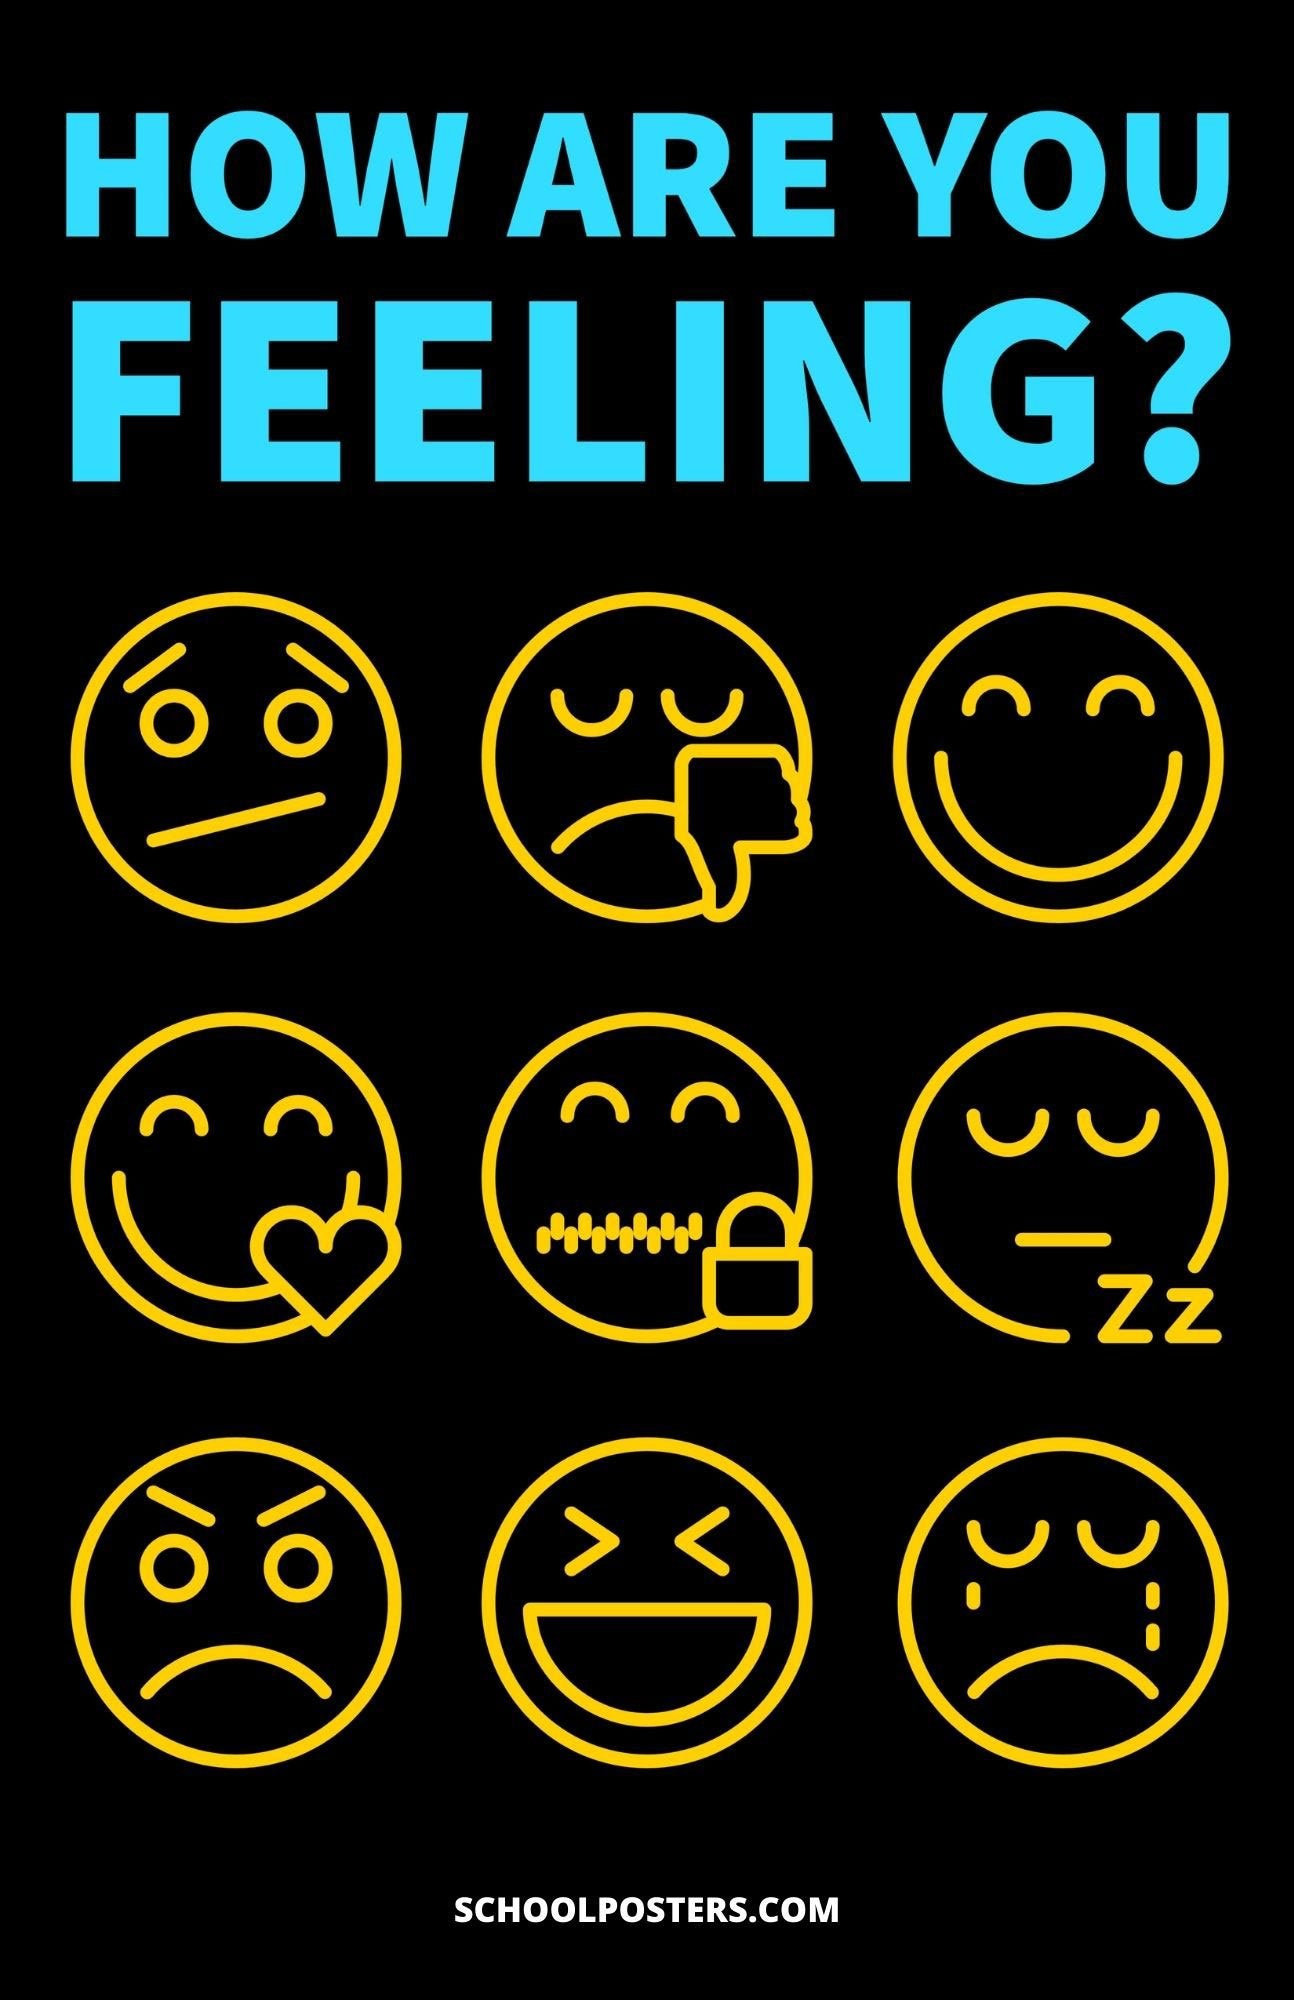 How Are You Feeling Poster